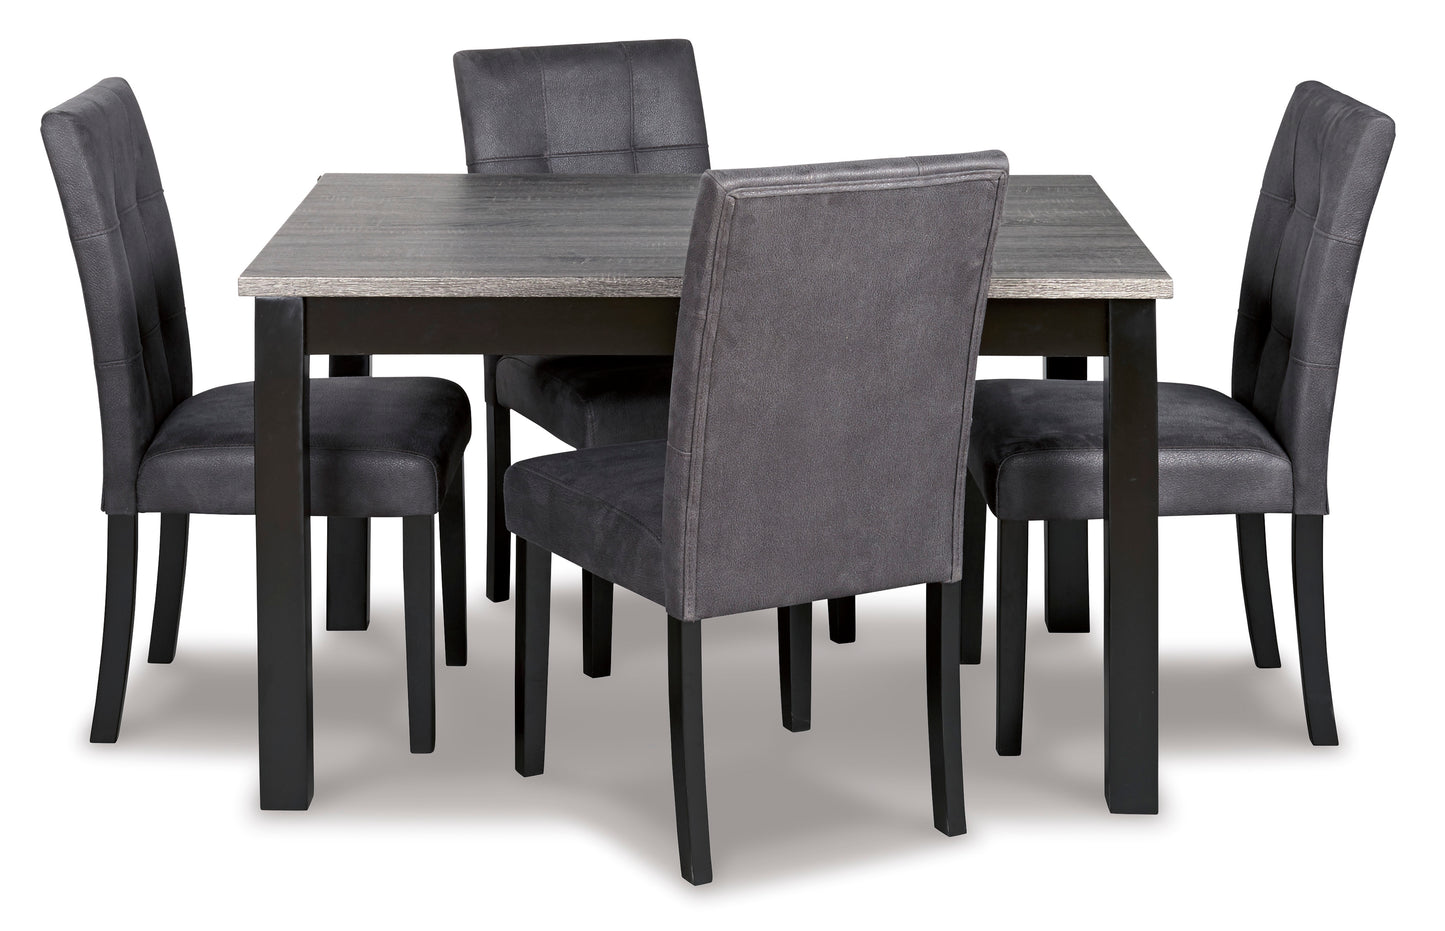 Garvine Dining Table and Chairs (Set of 5)